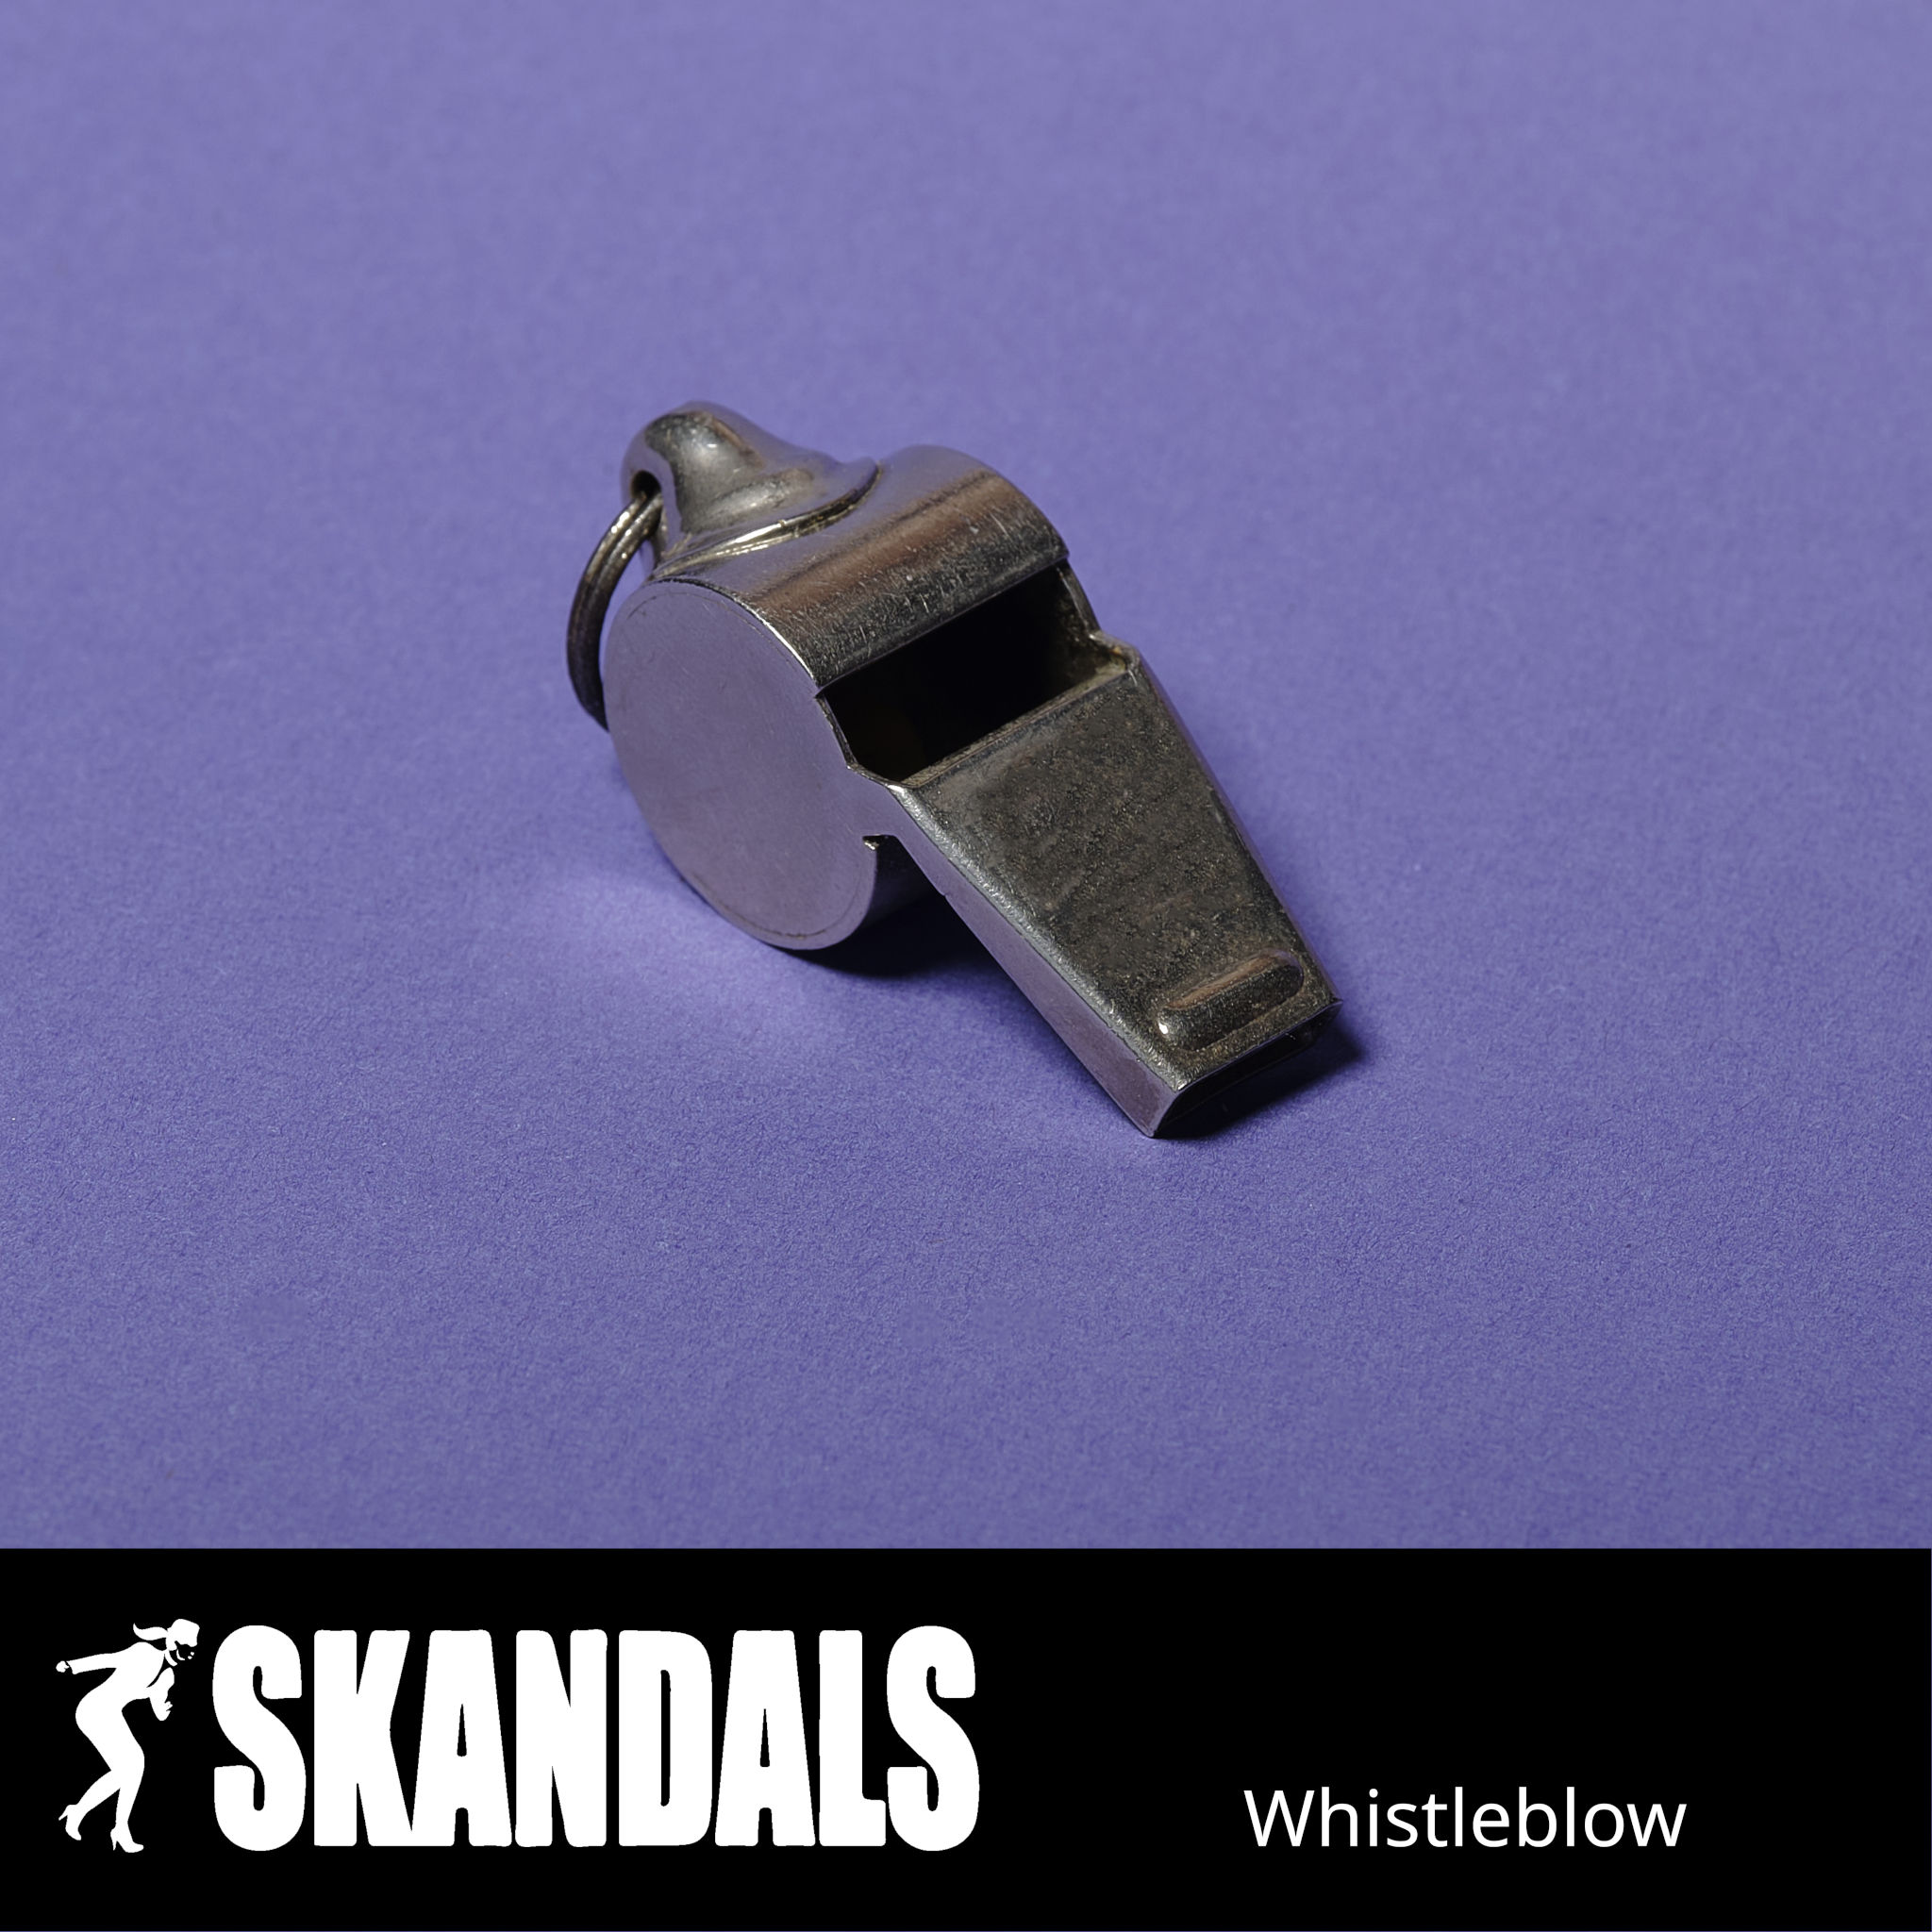 Cover of single shows whistle on purple background